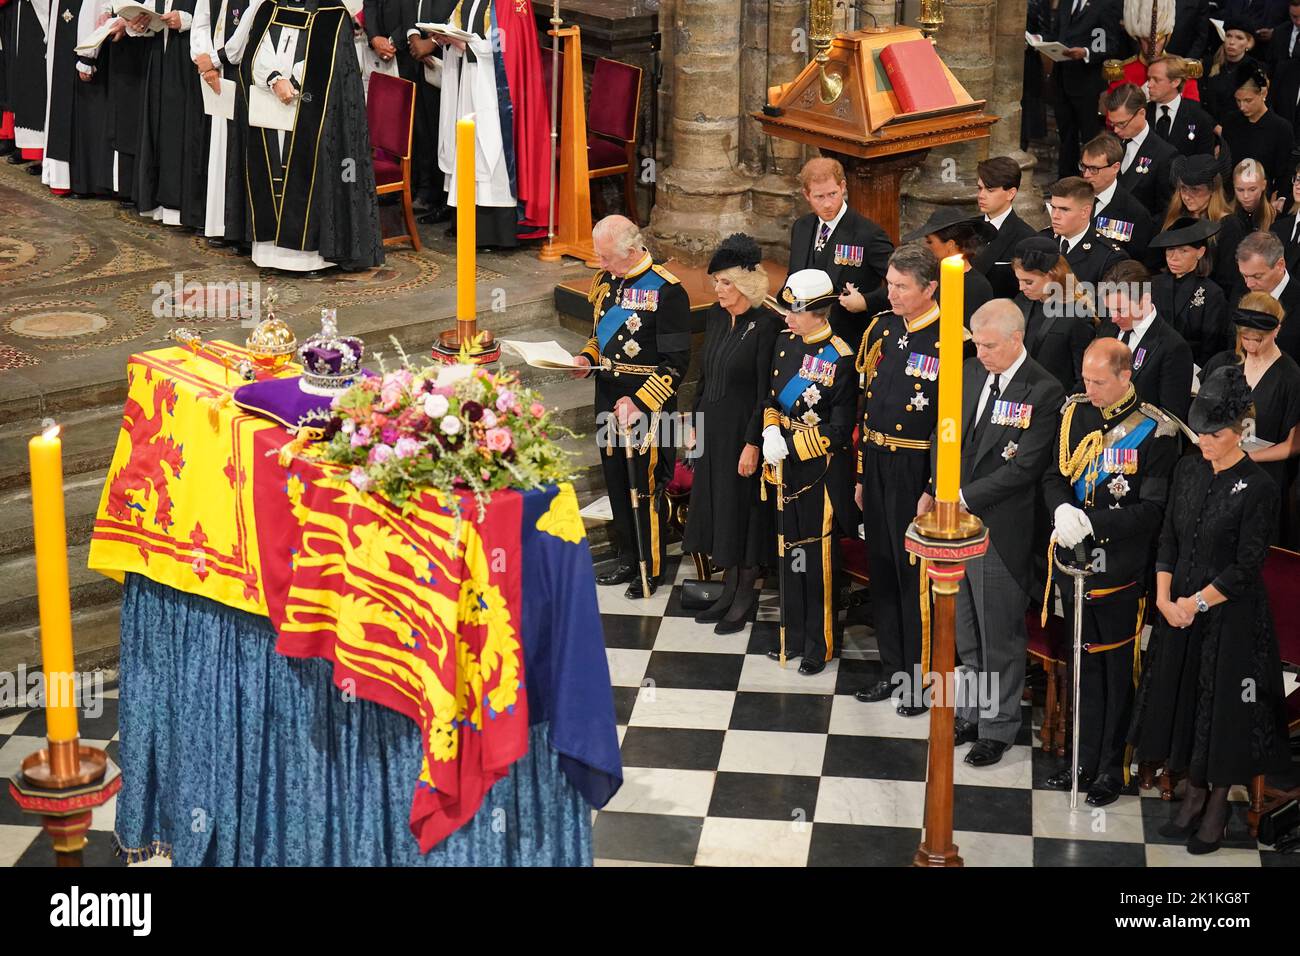 (front row) King Charles III, the Queen Consort, the Princess Royal, Vice Admiral Sir Tim Laurence, the Duke of York, the Earl of Wessex, the Countess of Wessex, (second row) the Duke of Sussex, the Duchess of Sussex, Princess Beatrice, Edoardo Mapelli Mozzi and Lady Louise Windsor and James, Viscount Severn, and (third row) Samuel Chatto, Arthur Chatto, Lady Sarah Chatto, Daniel Chatto and the Duchess of Gloucester in front of the coffin of Queen Elizabeth II during her State Funeral at the Abbey in London. Picture date: Monday September 19, 2022. Stock Photo